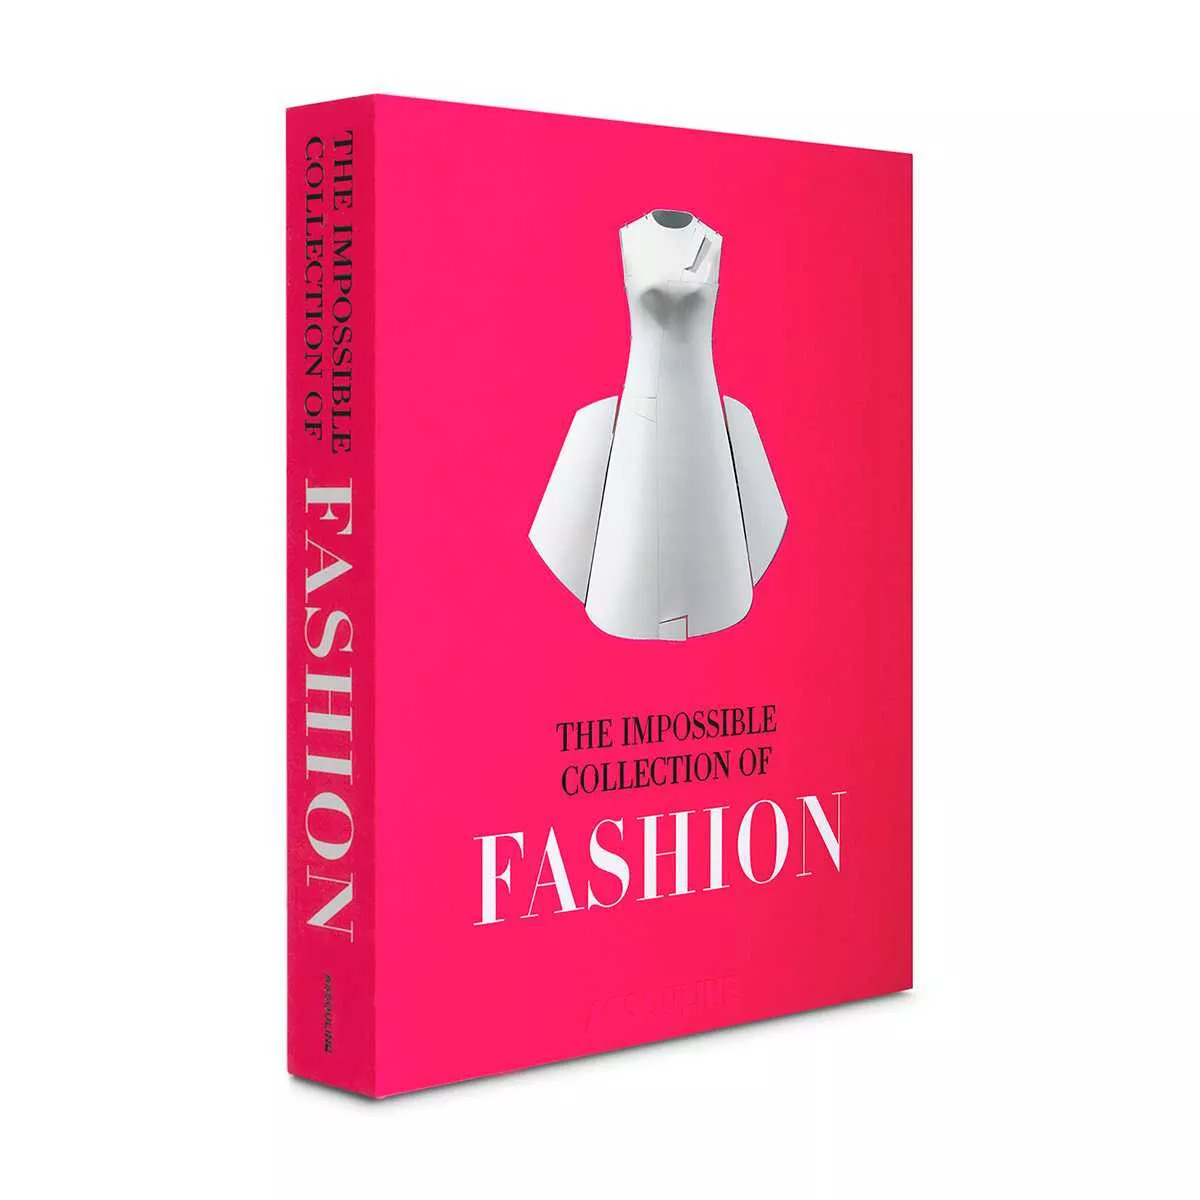 Книга "The Impossible Collection of Fashion" Assouline Collection (9781614280163) - Фото nav 2